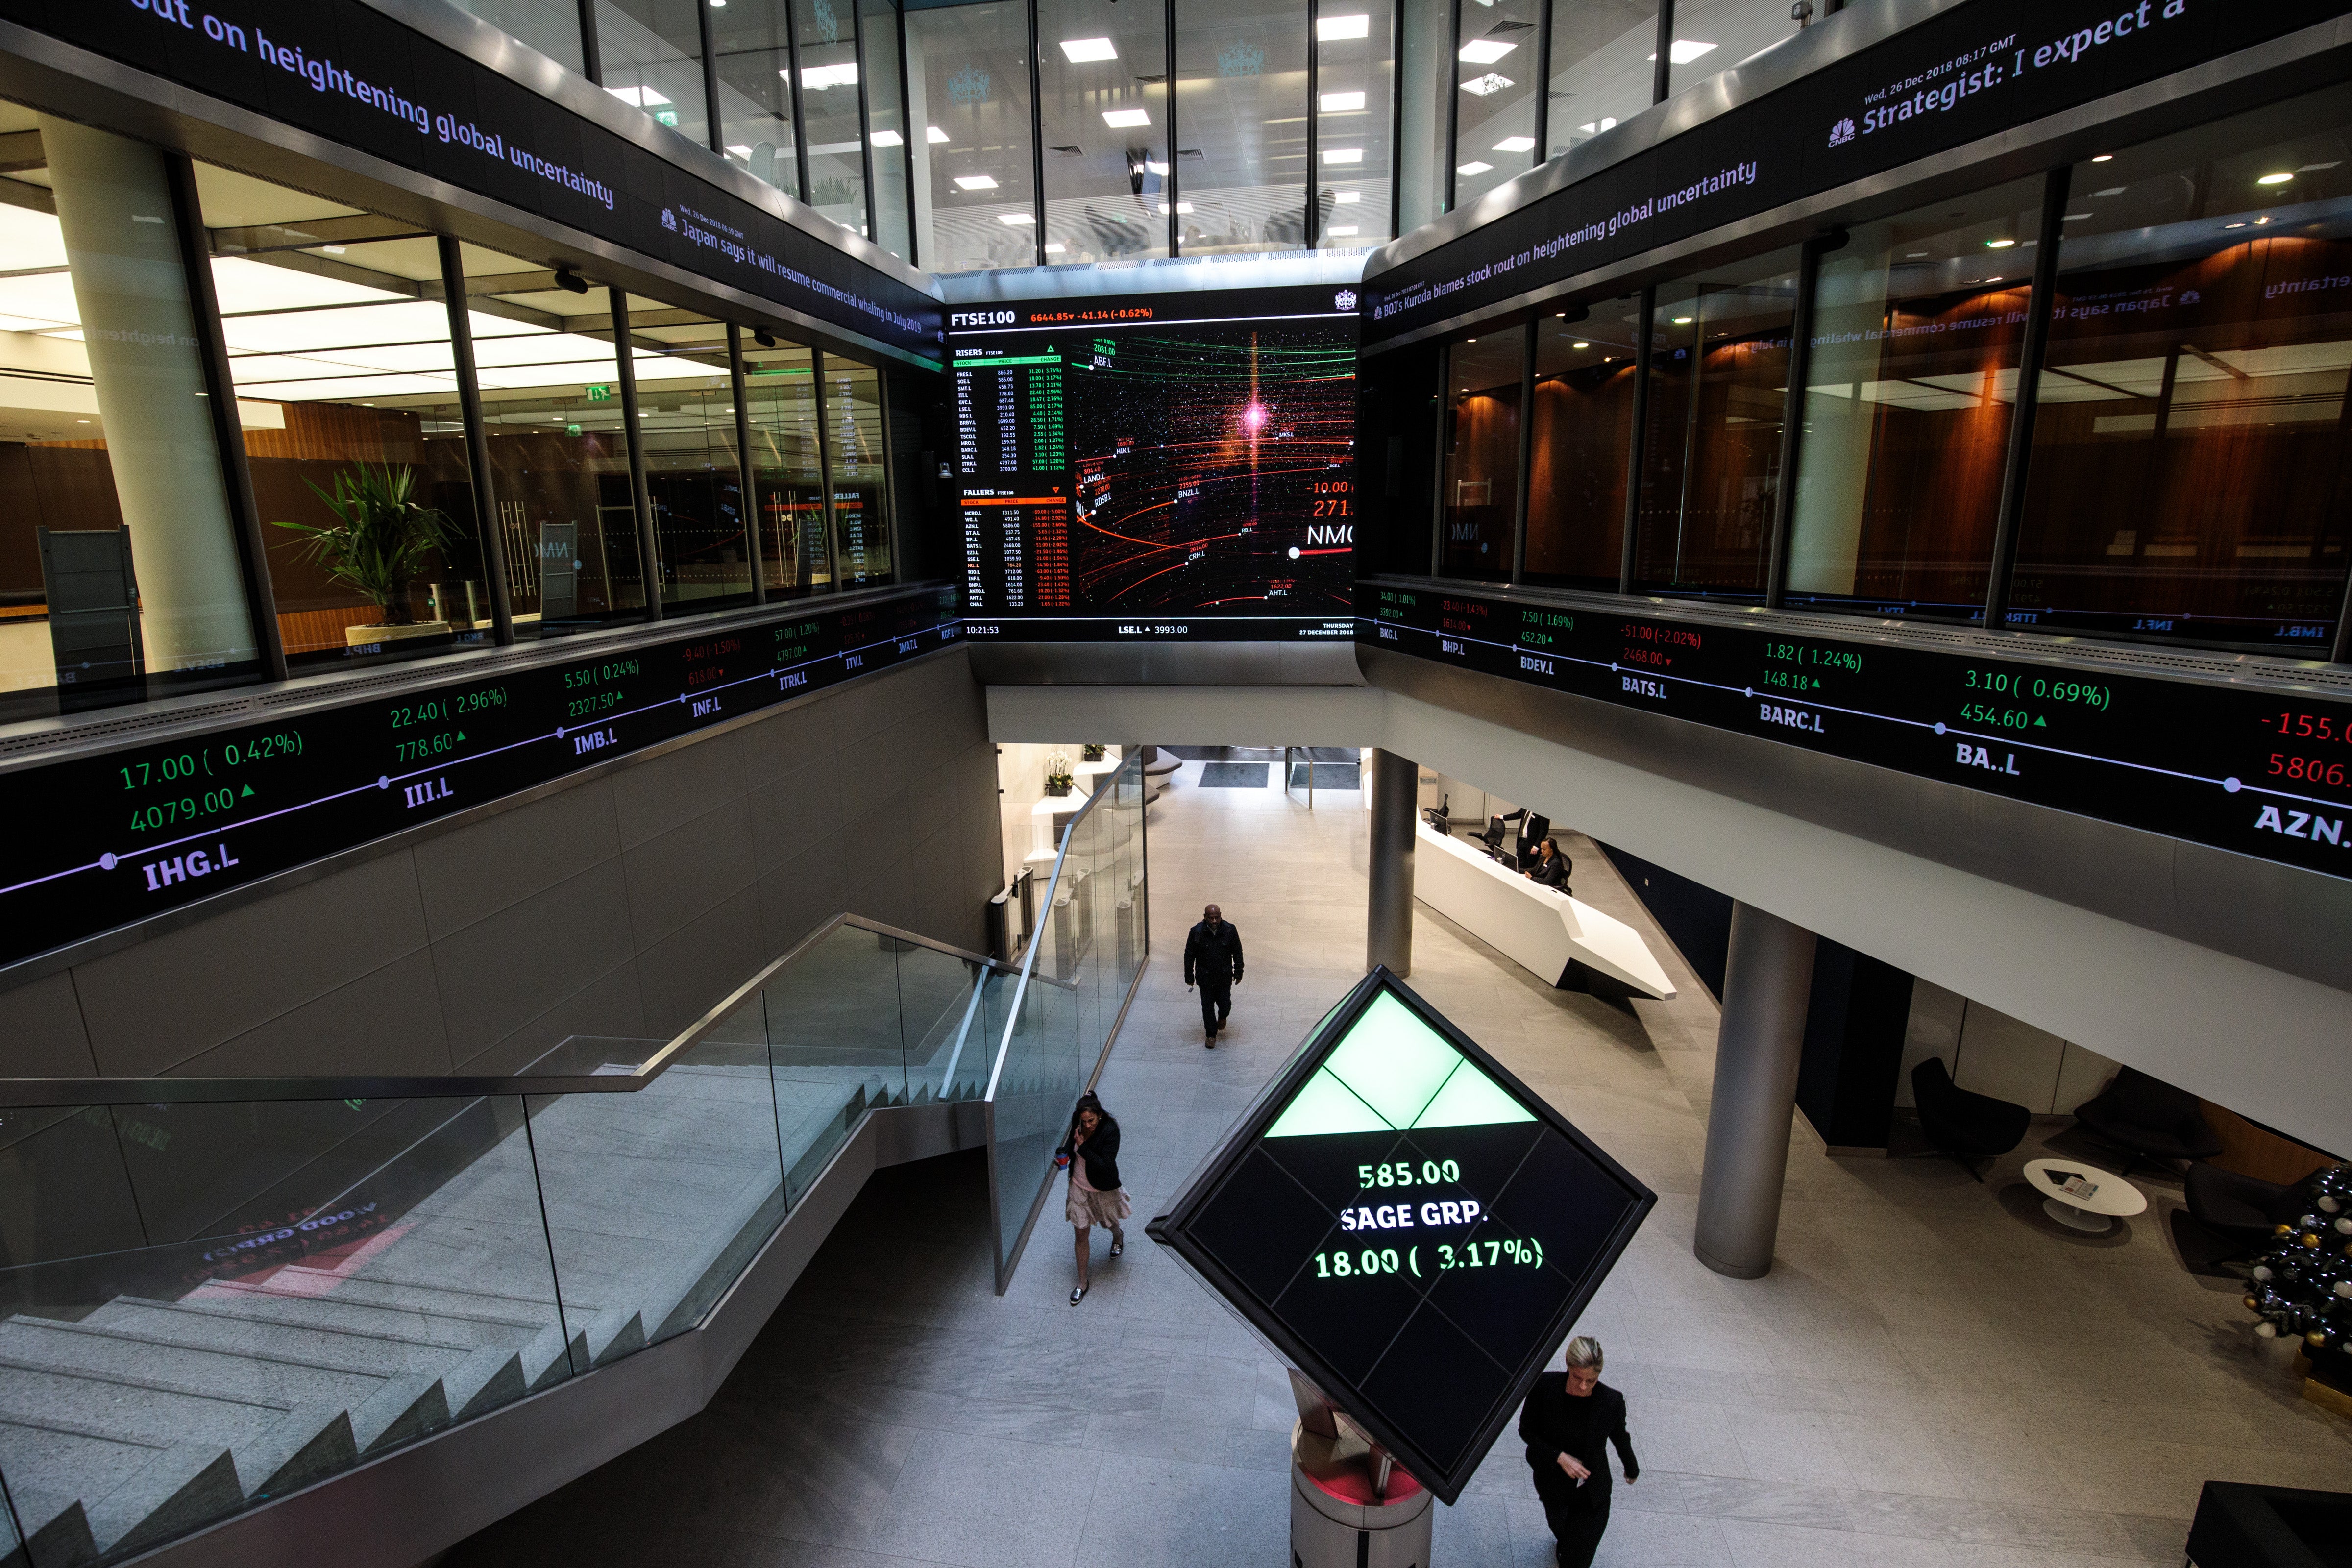 FTSE 100 reached its February 2020 levels on Monday